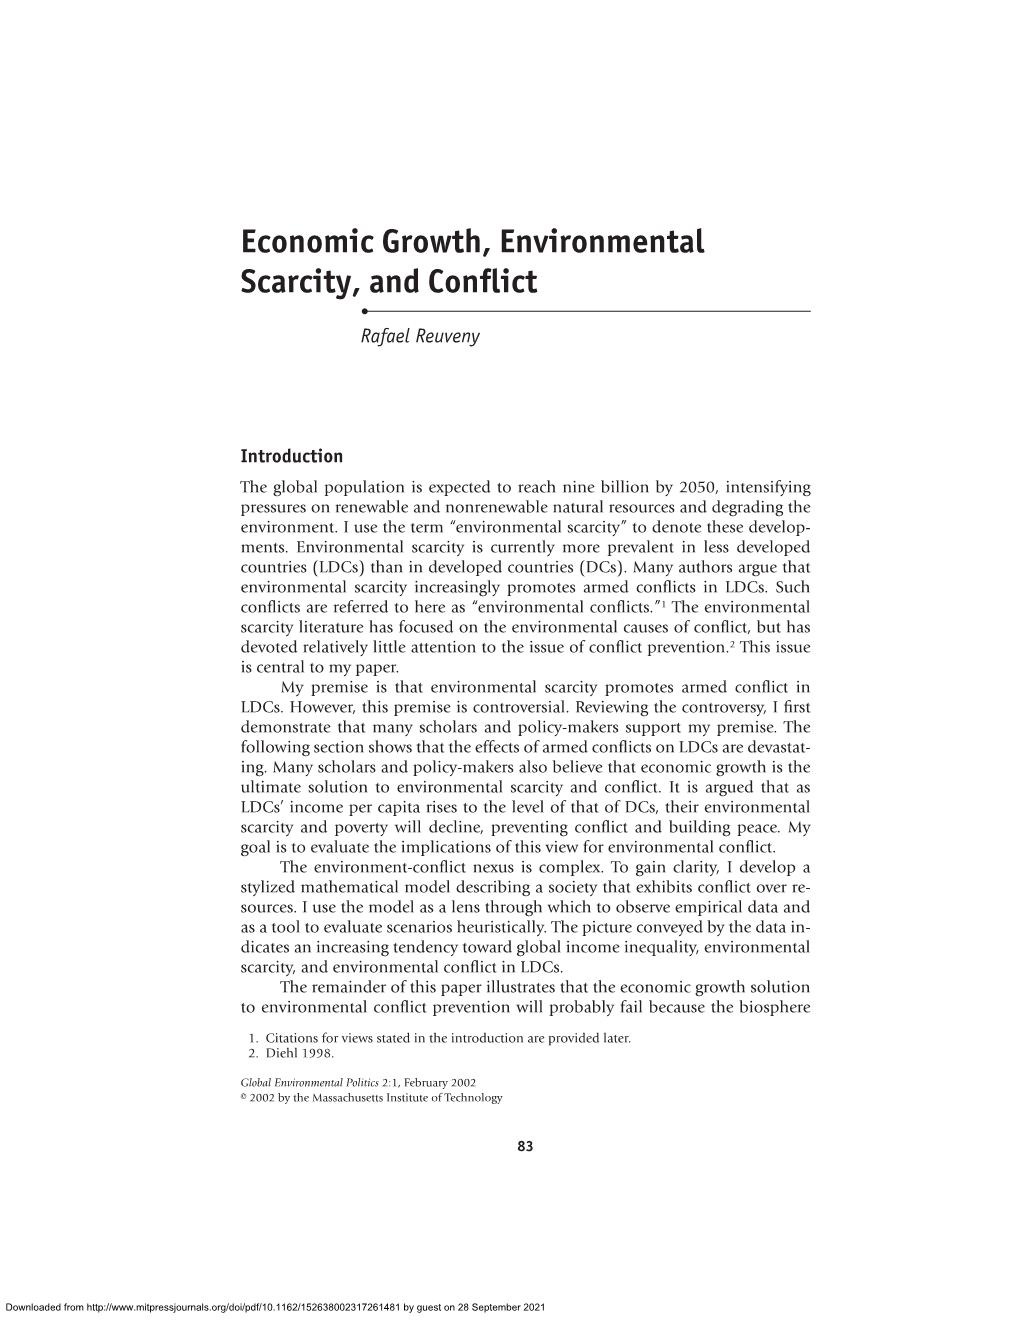 Economic Growth, Environmental Scarcity, and Conflict